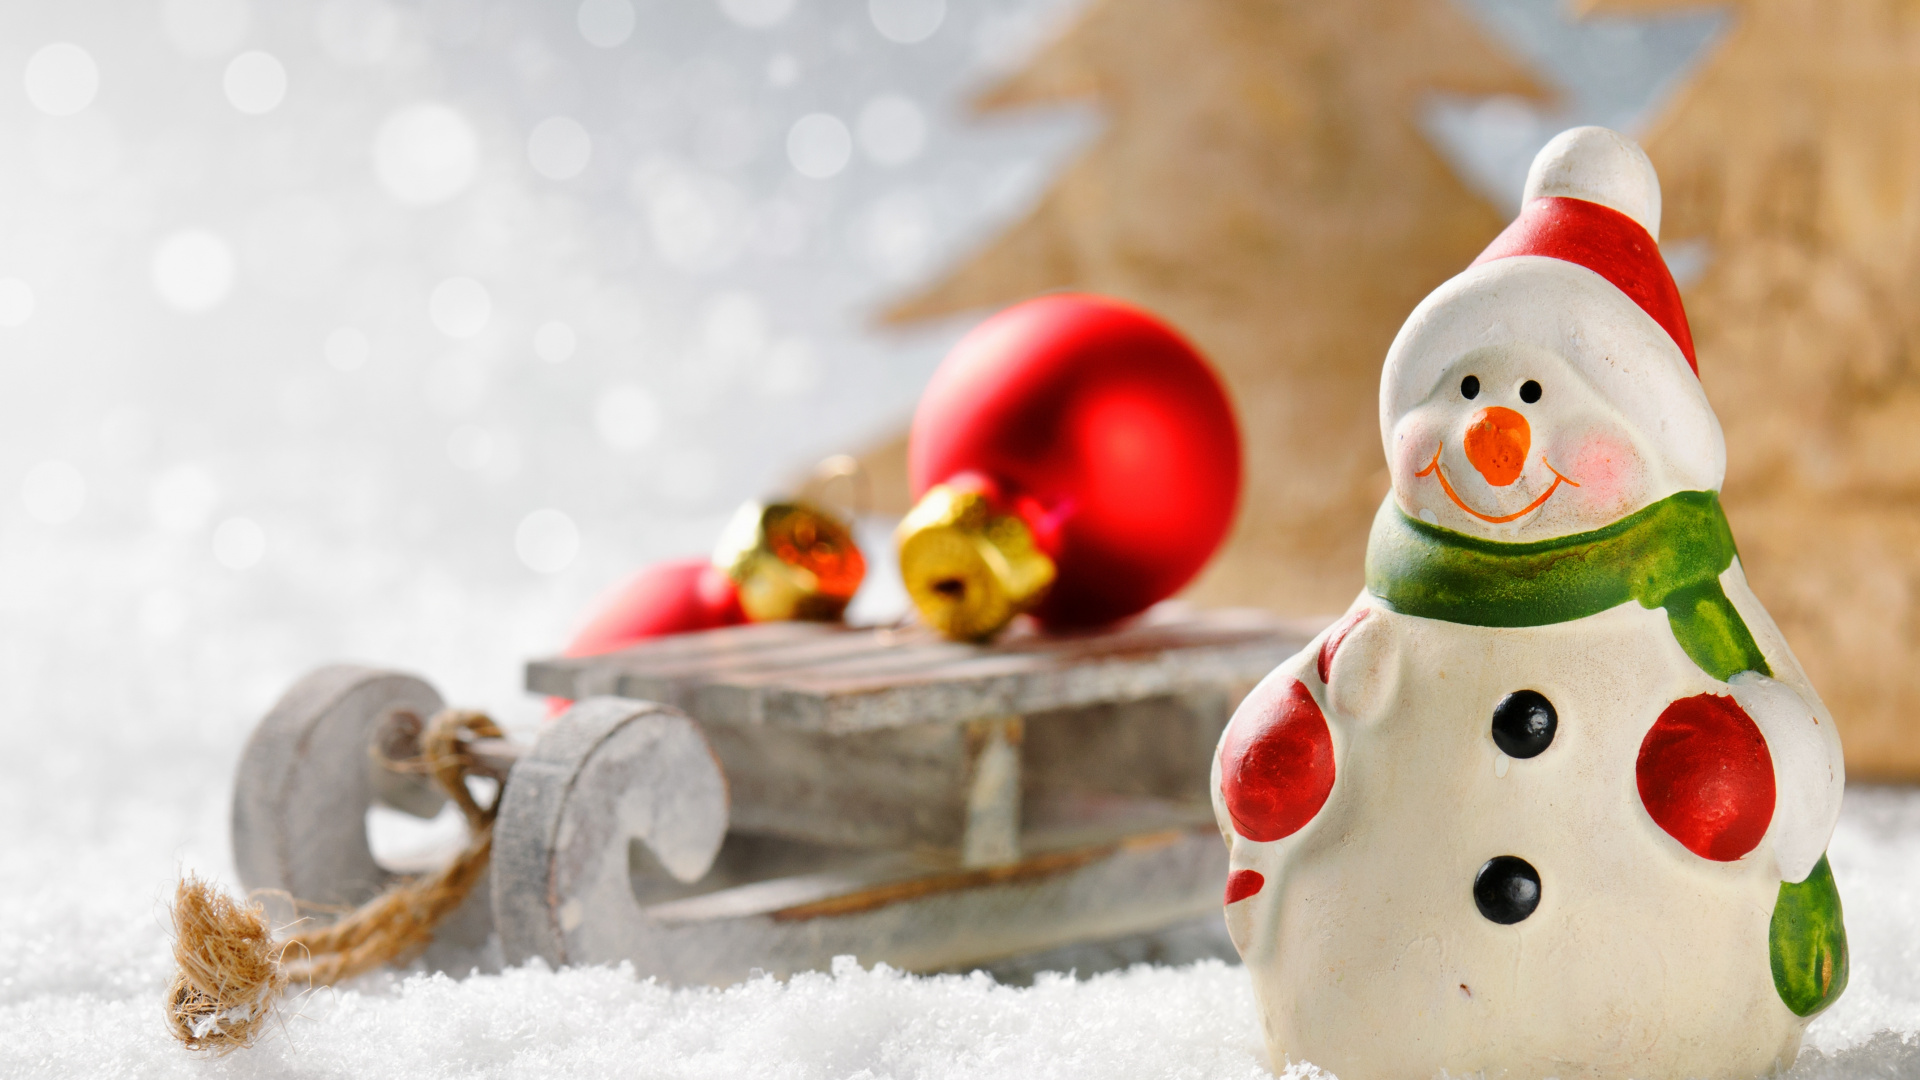 Christmas Day, Snowman, Holiday, Snow, Santa Claus. Wallpaper in 1920x1080 Resolution